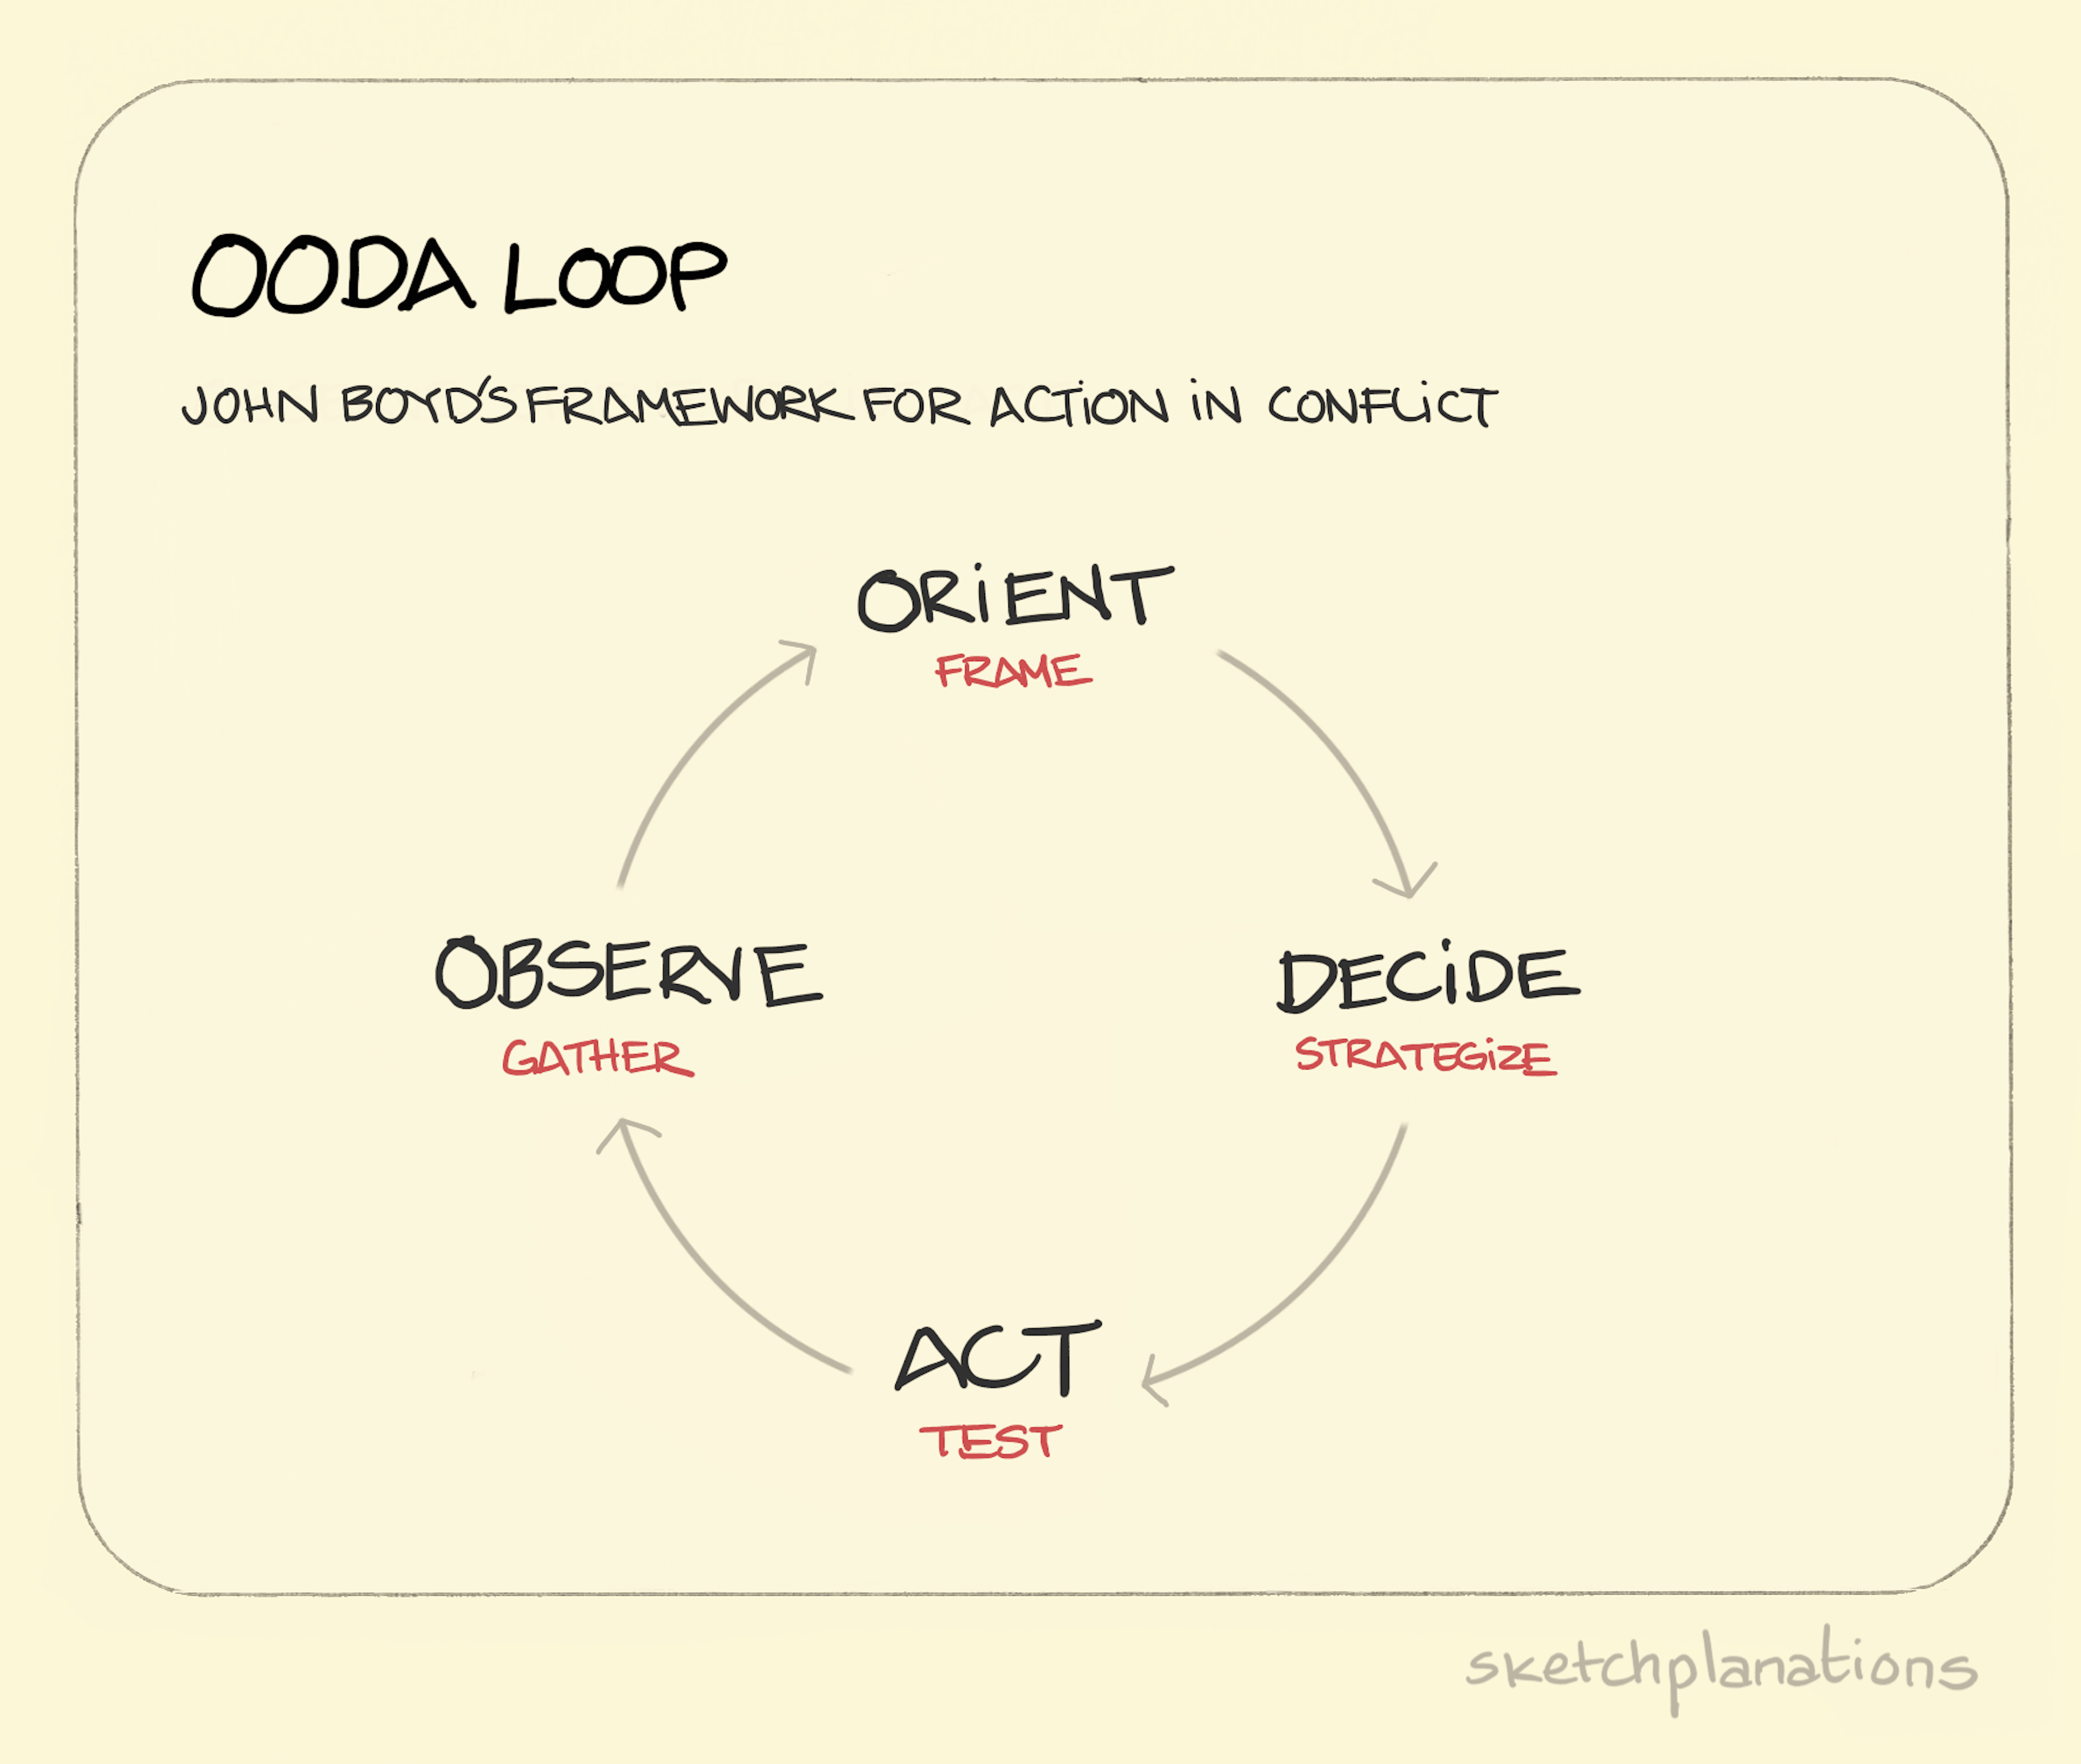 OODA Loop illustration: military strategist John Boyd's framework for action in conflict is shown as a closed loop cycle of Orient, Decide, Act, Observe and back to the beginning. The cycle also applies to business when you reconsider the points on the cycle as Frame, Strategize, Test, Gather. 